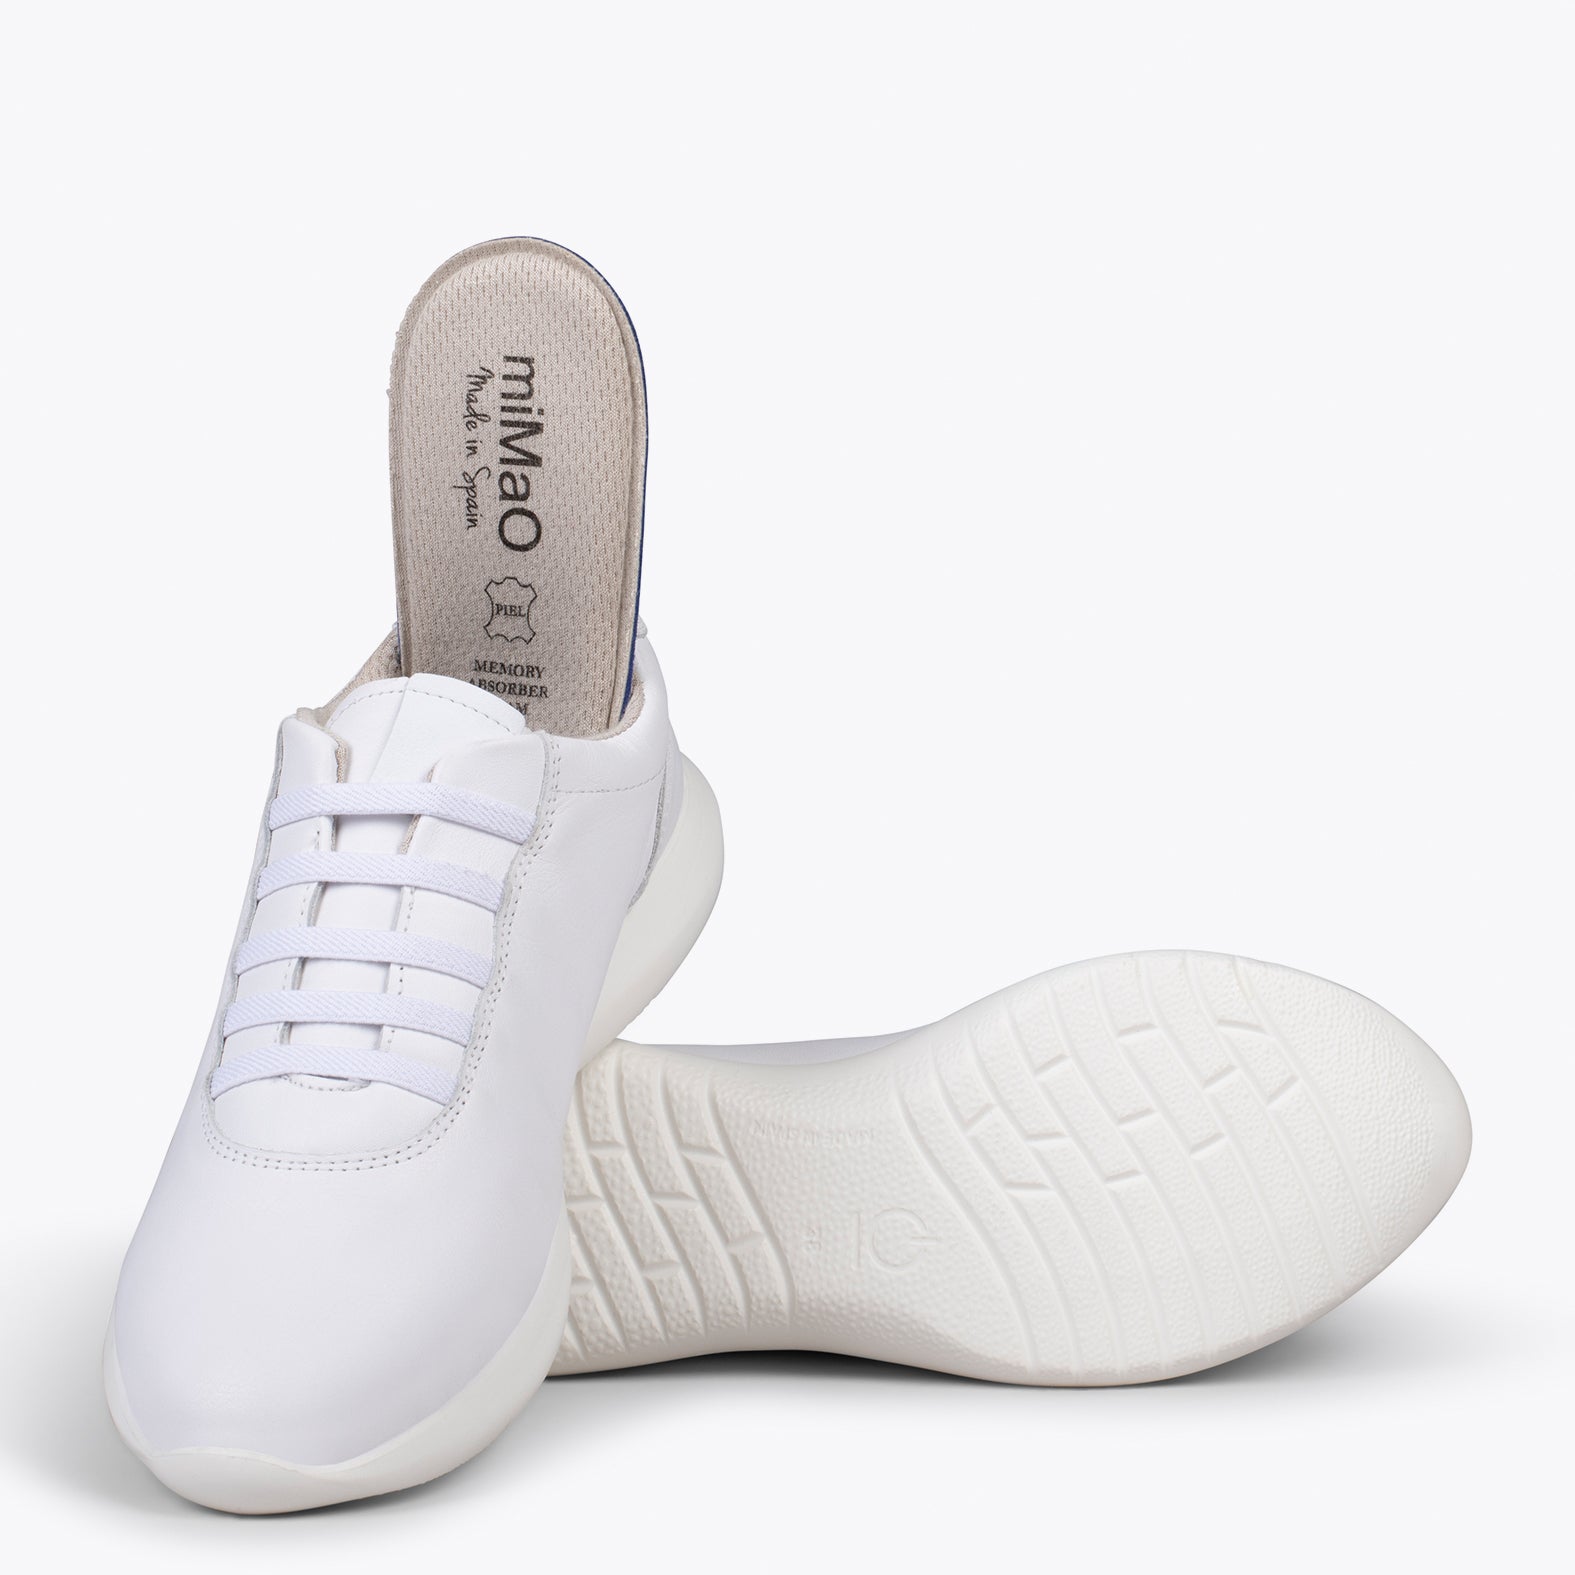 CHICAGO – WHITE sneakers with elastic laces